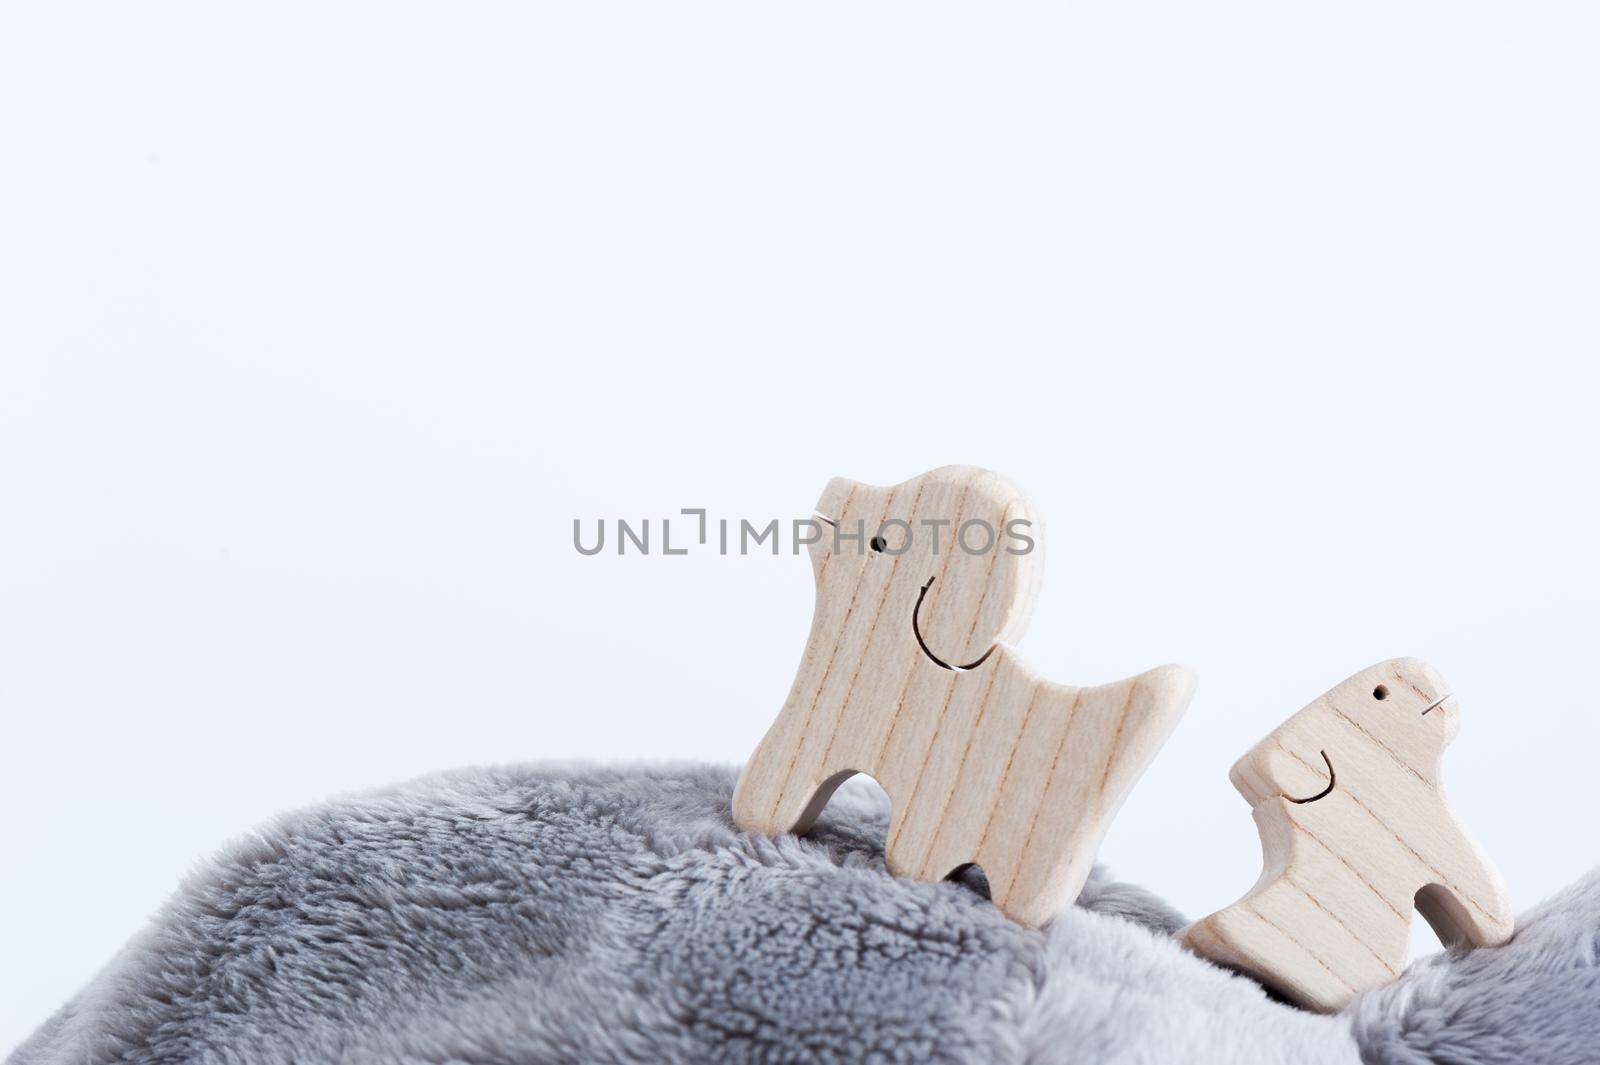 wooden toy animals by norgal